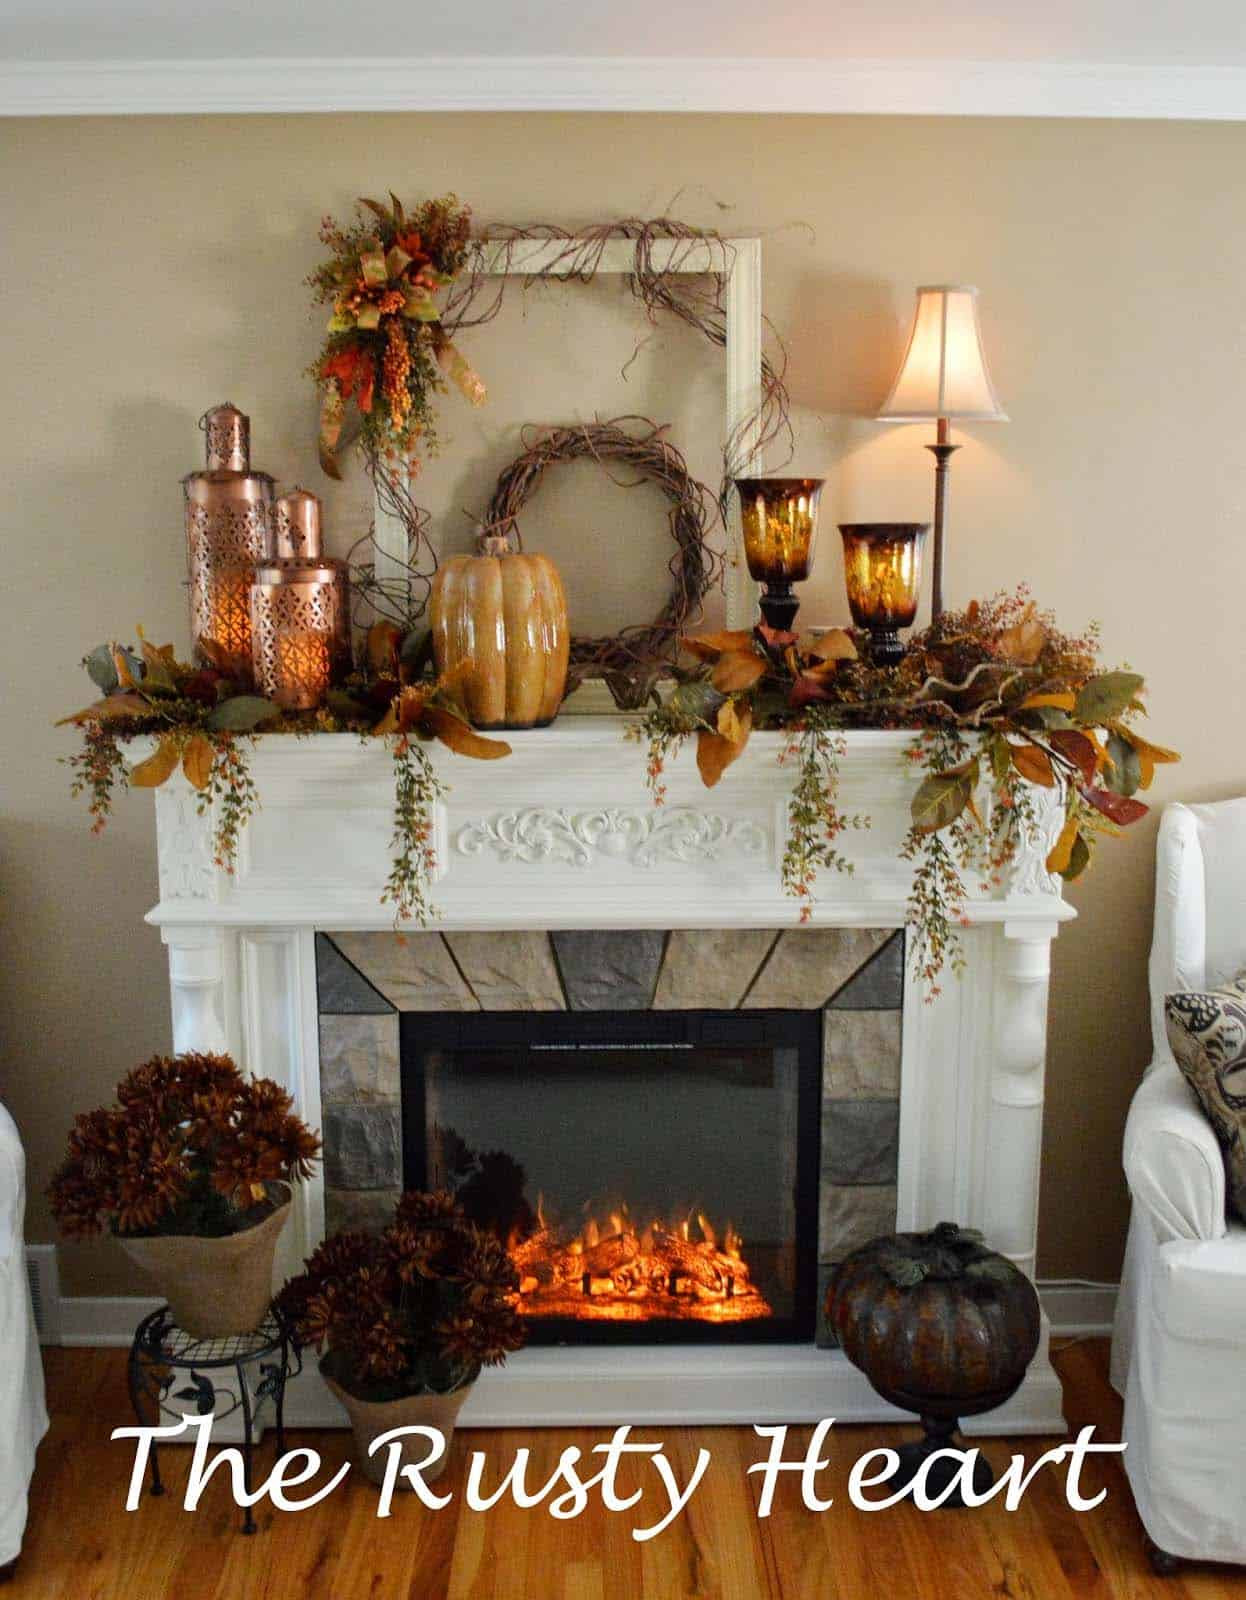 Fall Decor For Fireplace
 30 Amazing fall decorating ideas for your fireplace mantel